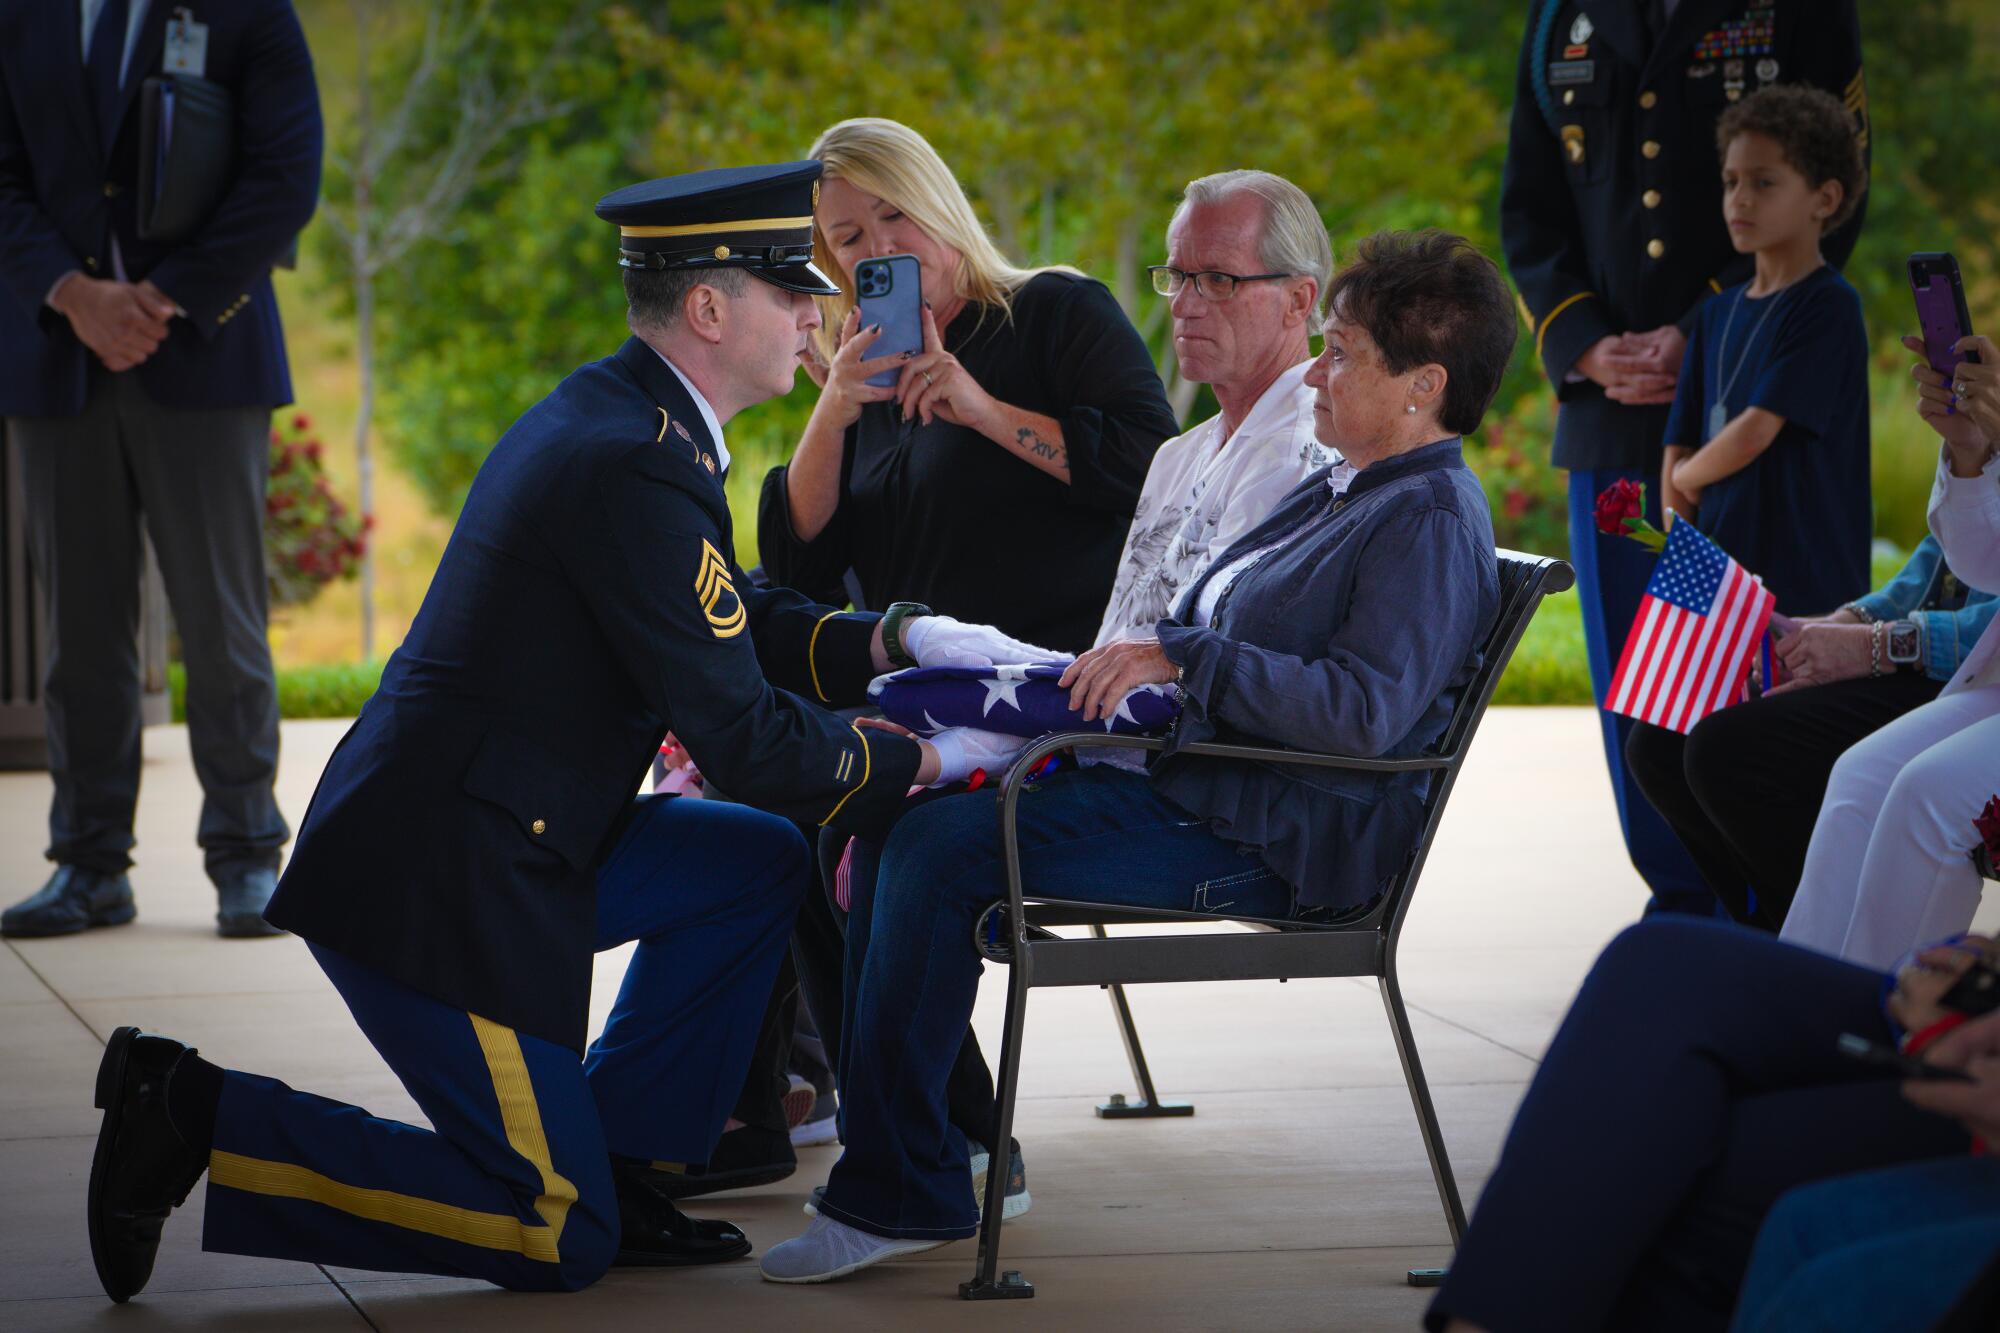 A member of the U.S. Army National Guard Honor Guard presents a folded U.S. flag to Marcia McKeon.